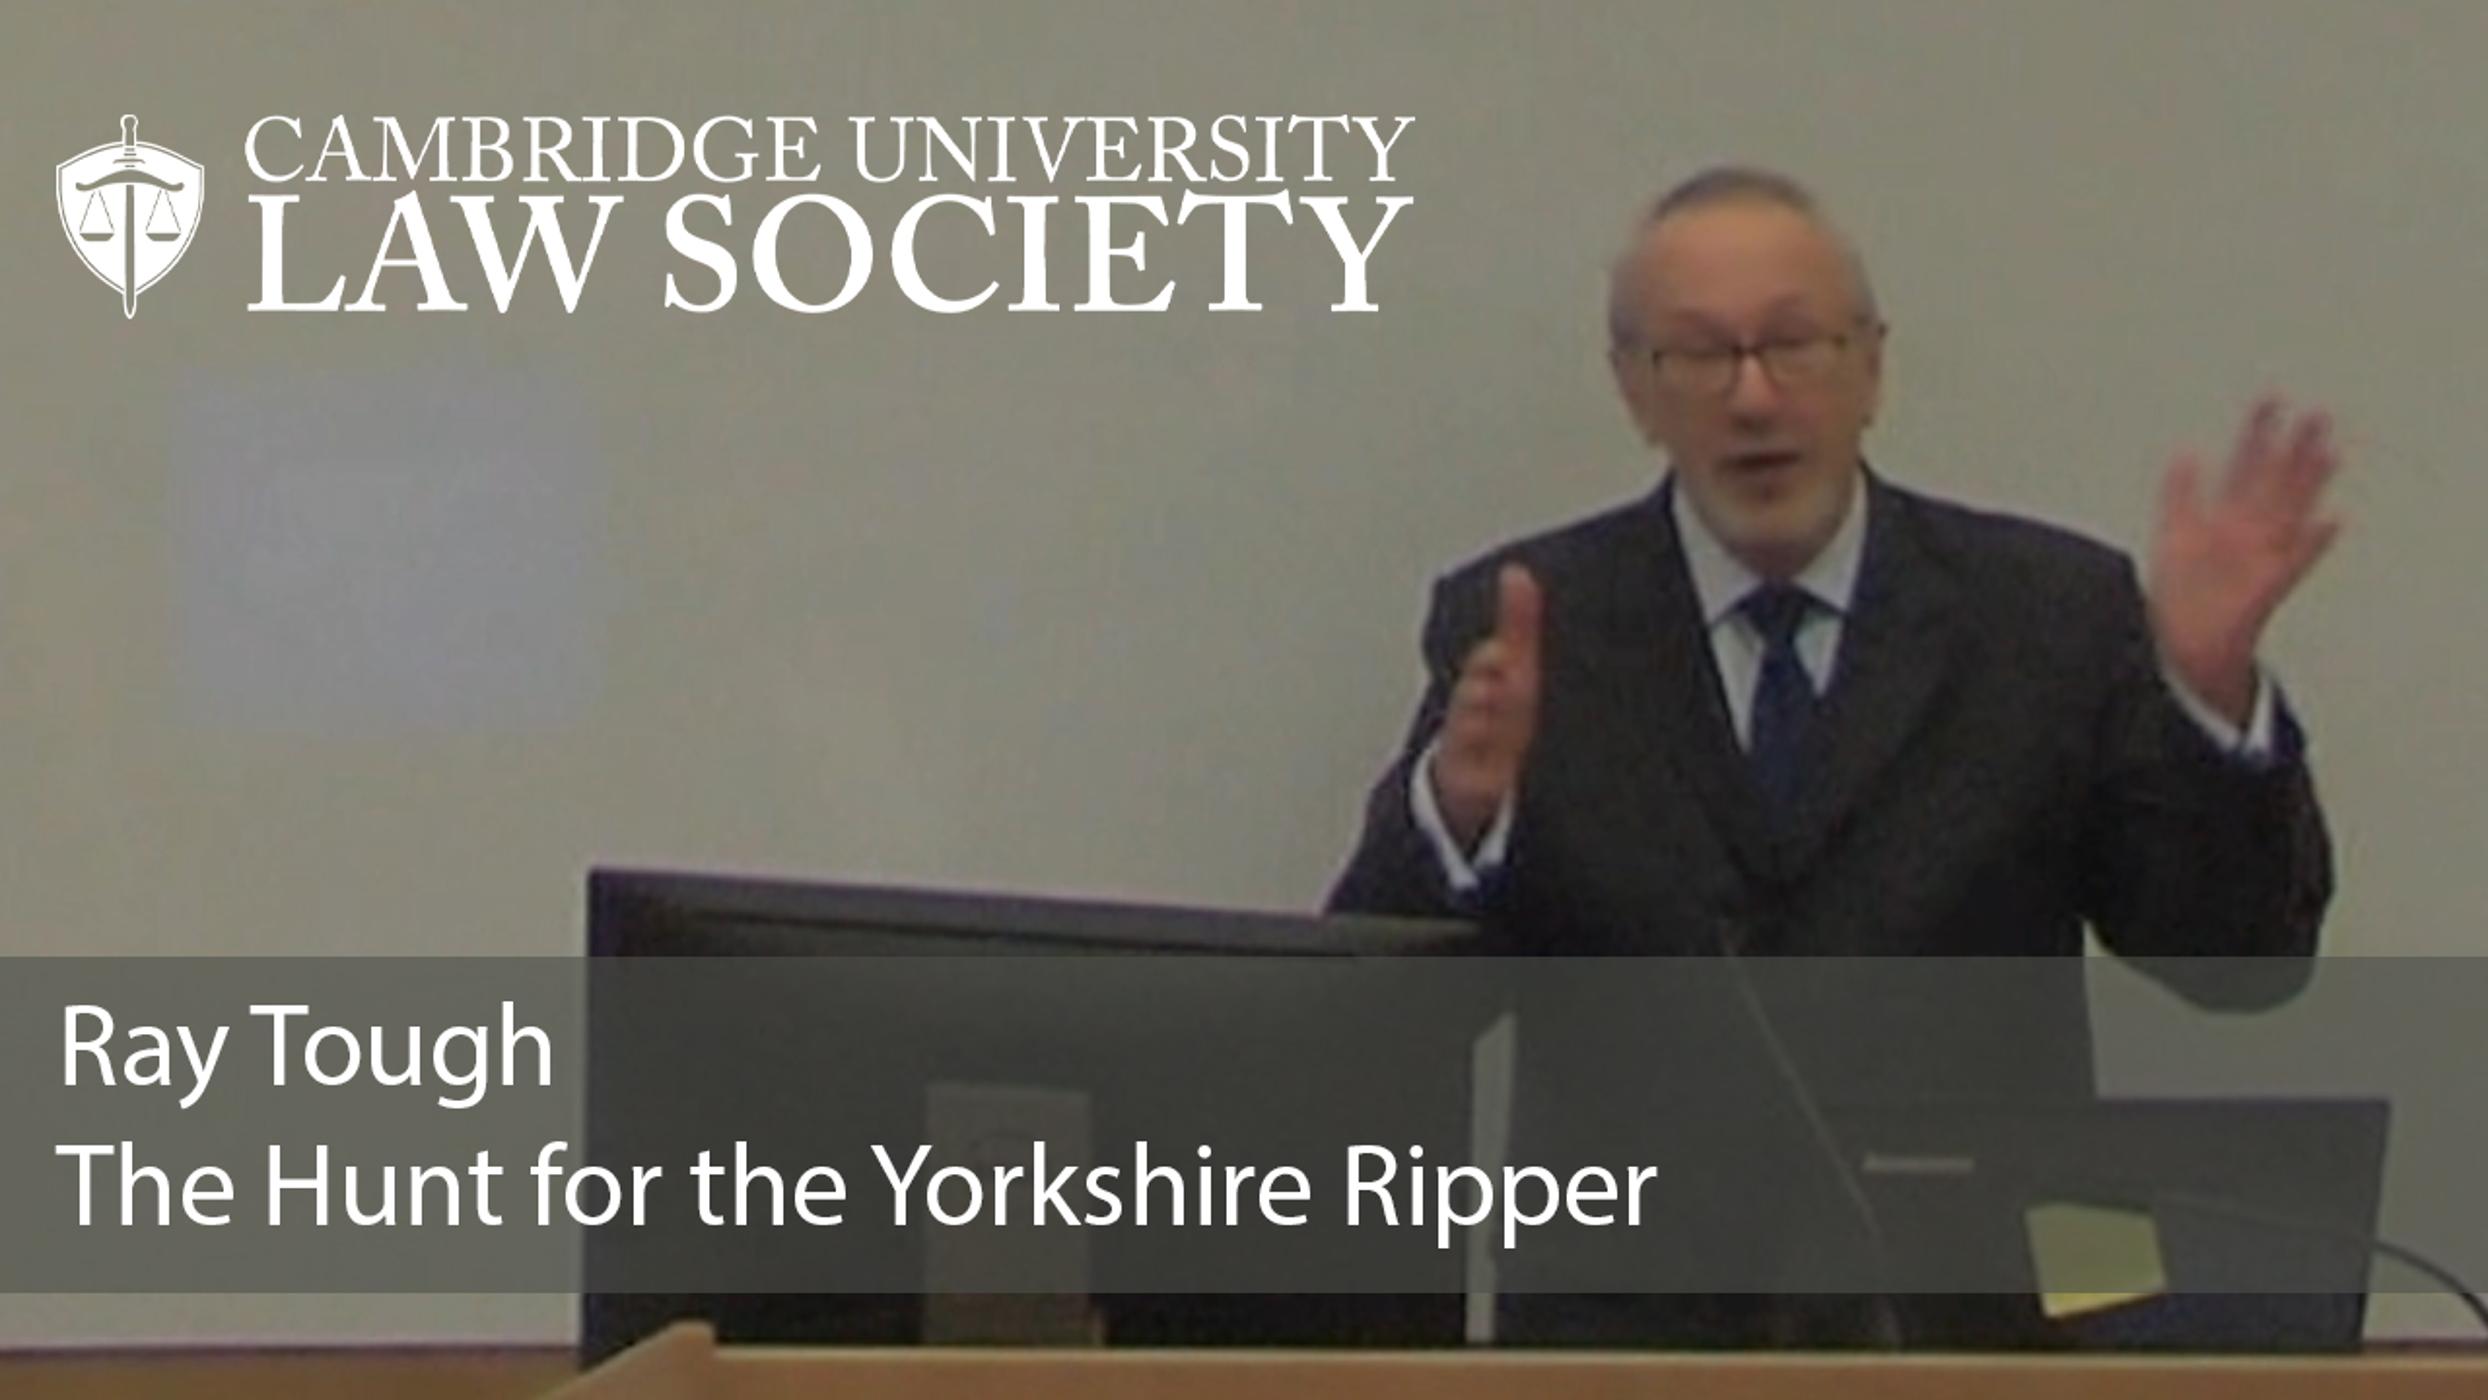 'The Hunt for the Yorkshire Ripper' - Ray Tough: CULS Lecture